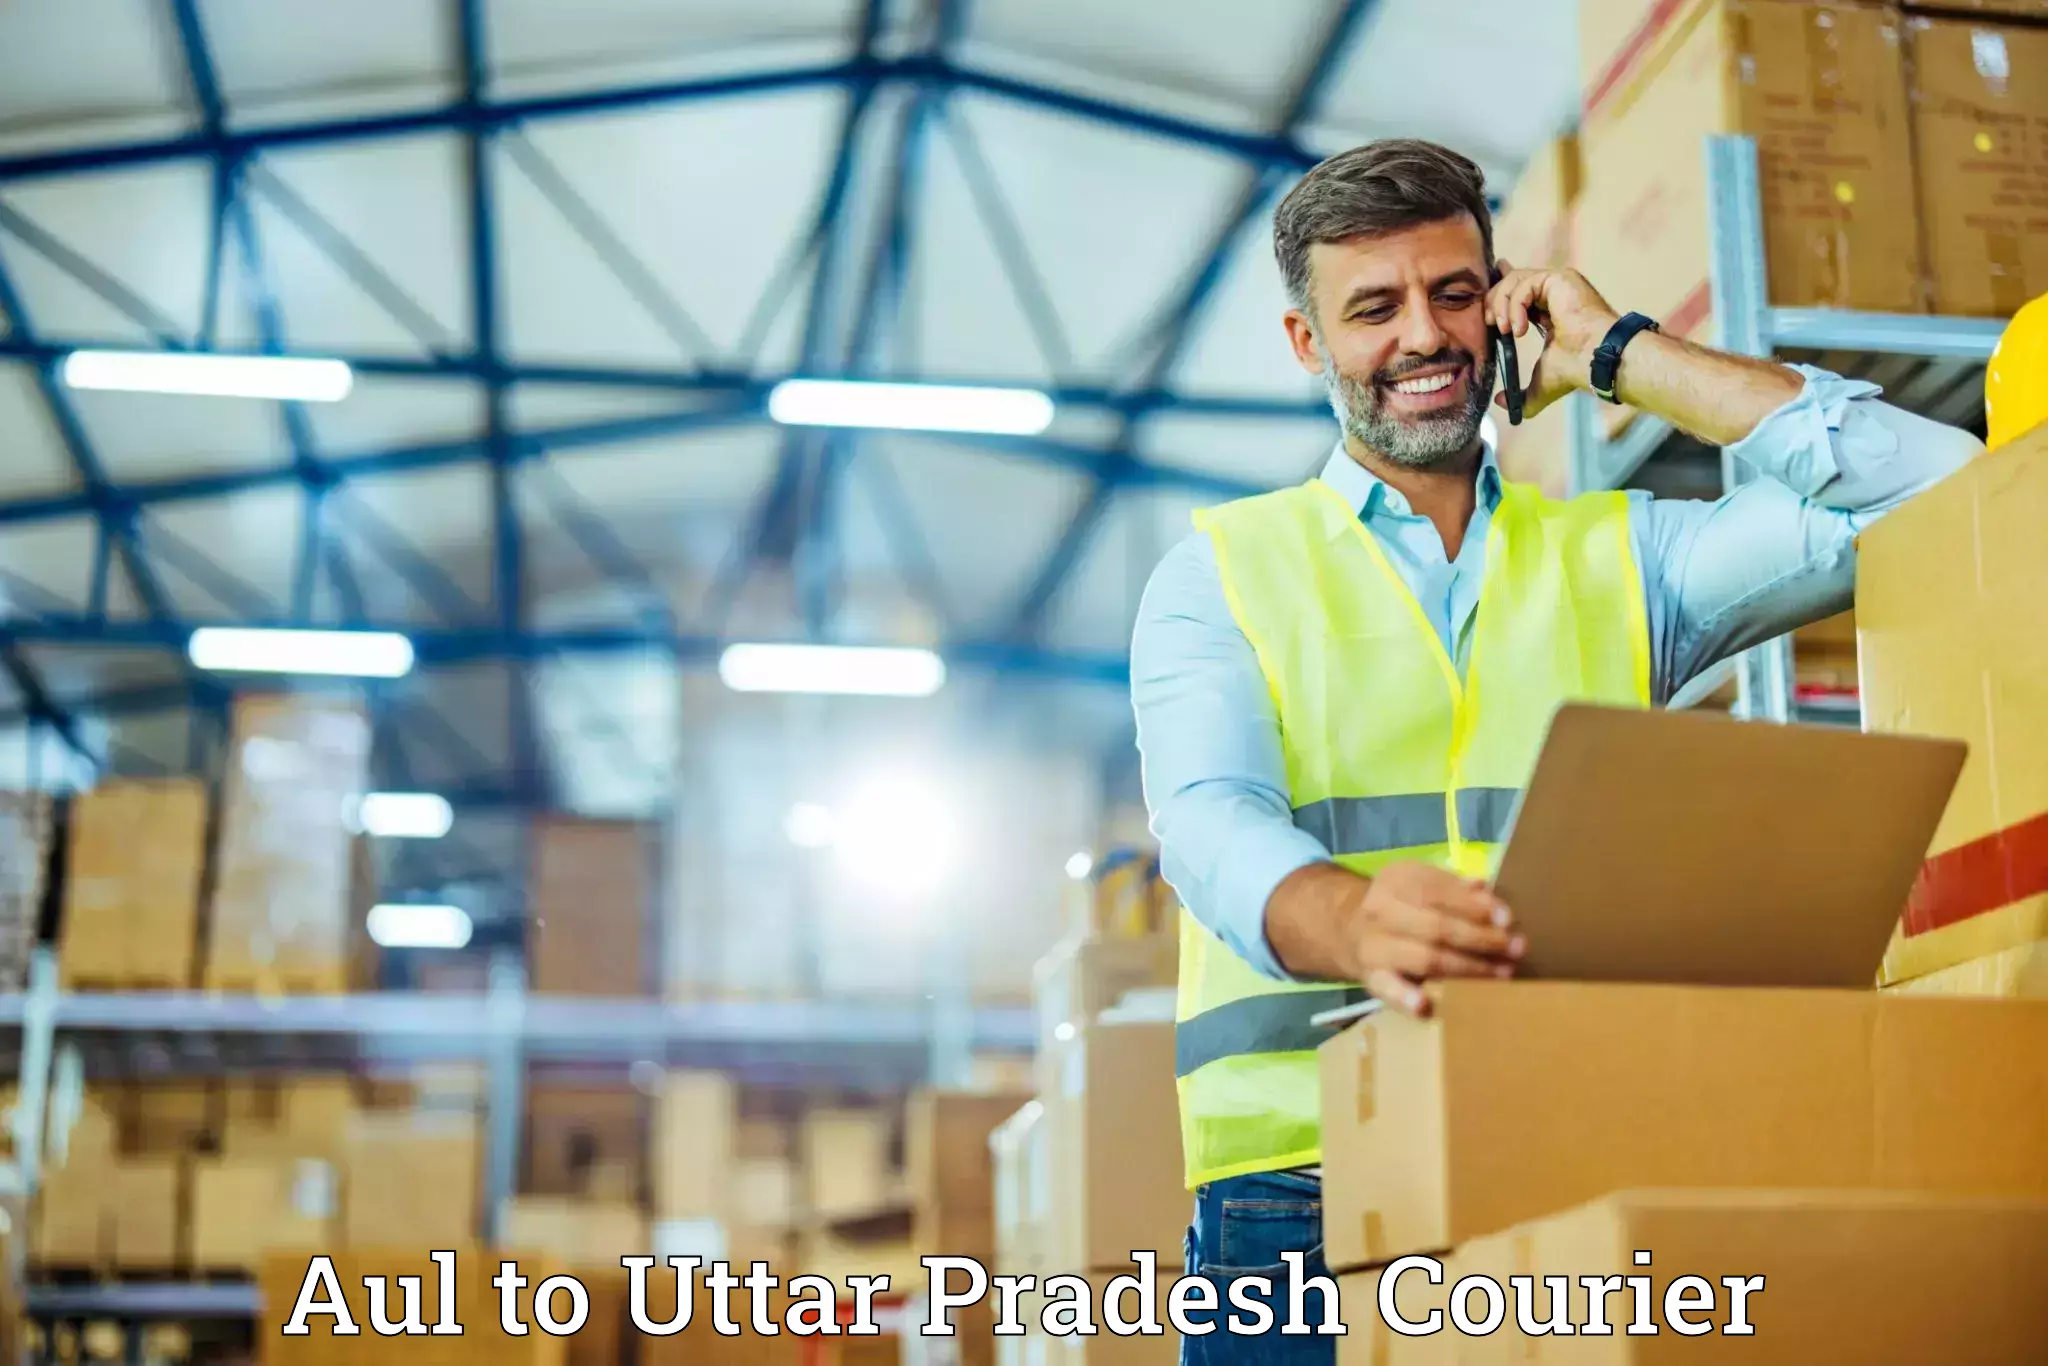 Cost-effective moving options Aul to Bareilly